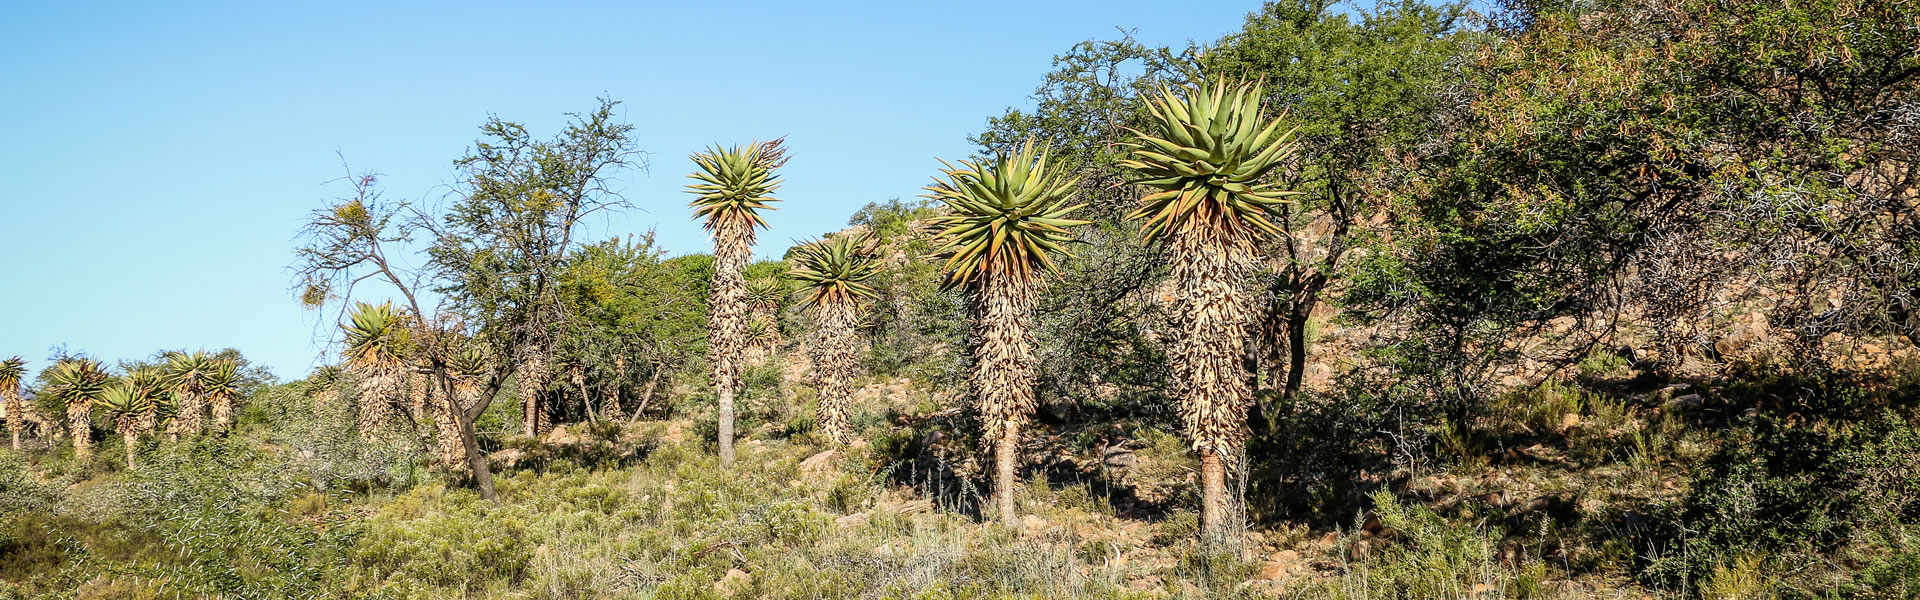 Aloes - visit in winter to see them bloom